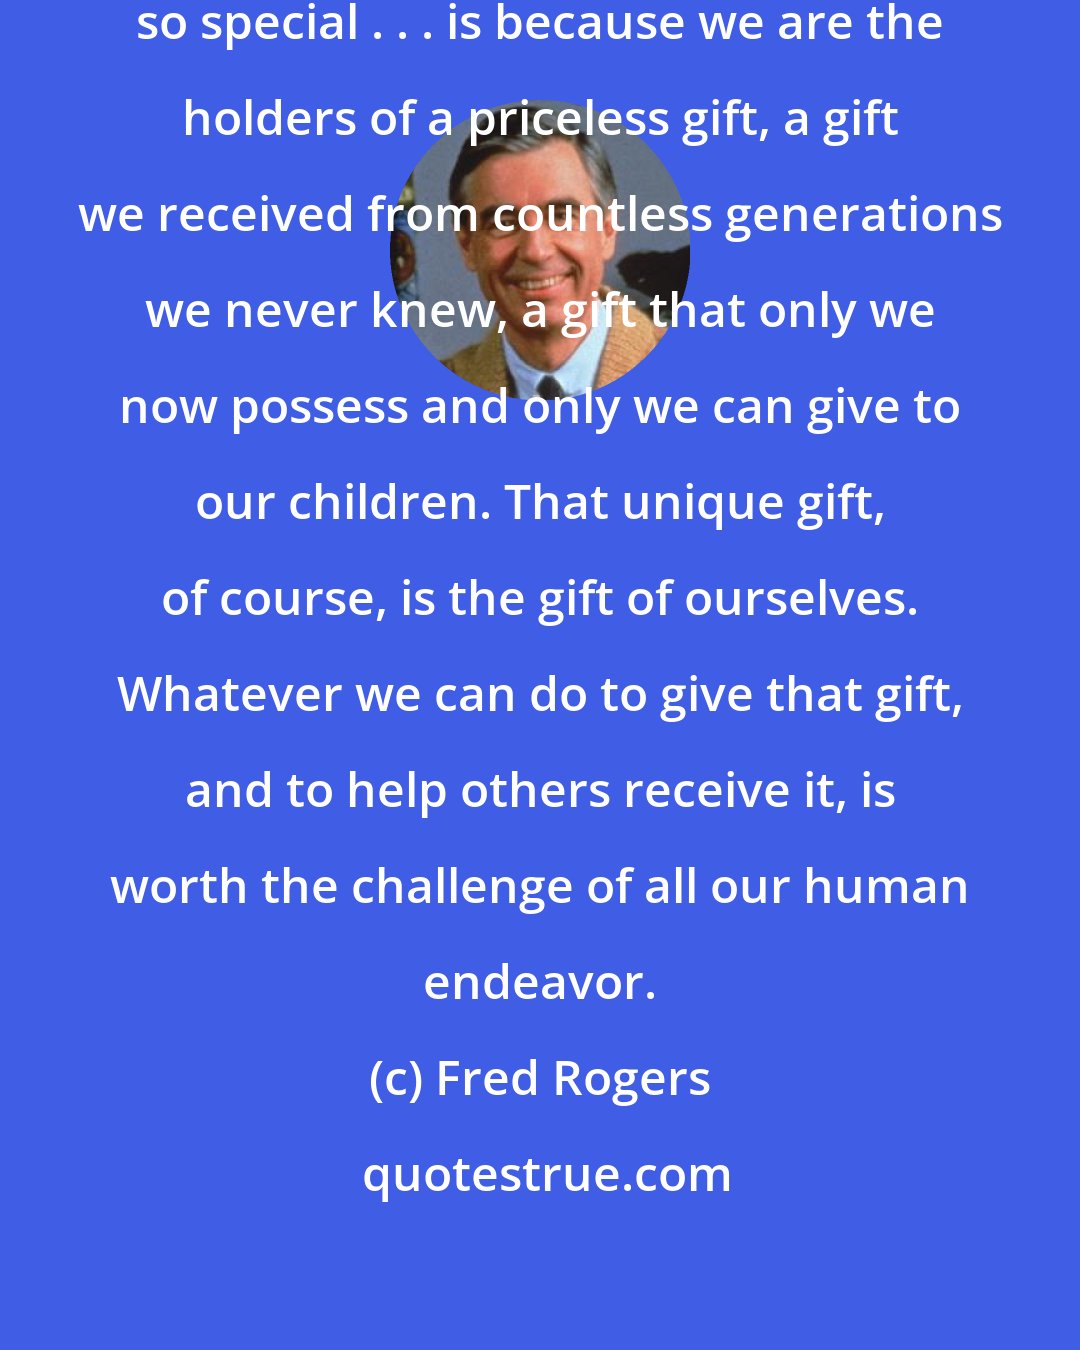 Fred Rogers: The very best reason parents are so special . . . is because we are the holders of a priceless gift, a gift we received from countless generations we never knew, a gift that only we now possess and only we can give to our children. That unique gift, of course, is the gift of ourselves. Whatever we can do to give that gift, and to help others receive it, is worth the challenge of all our human endeavor.